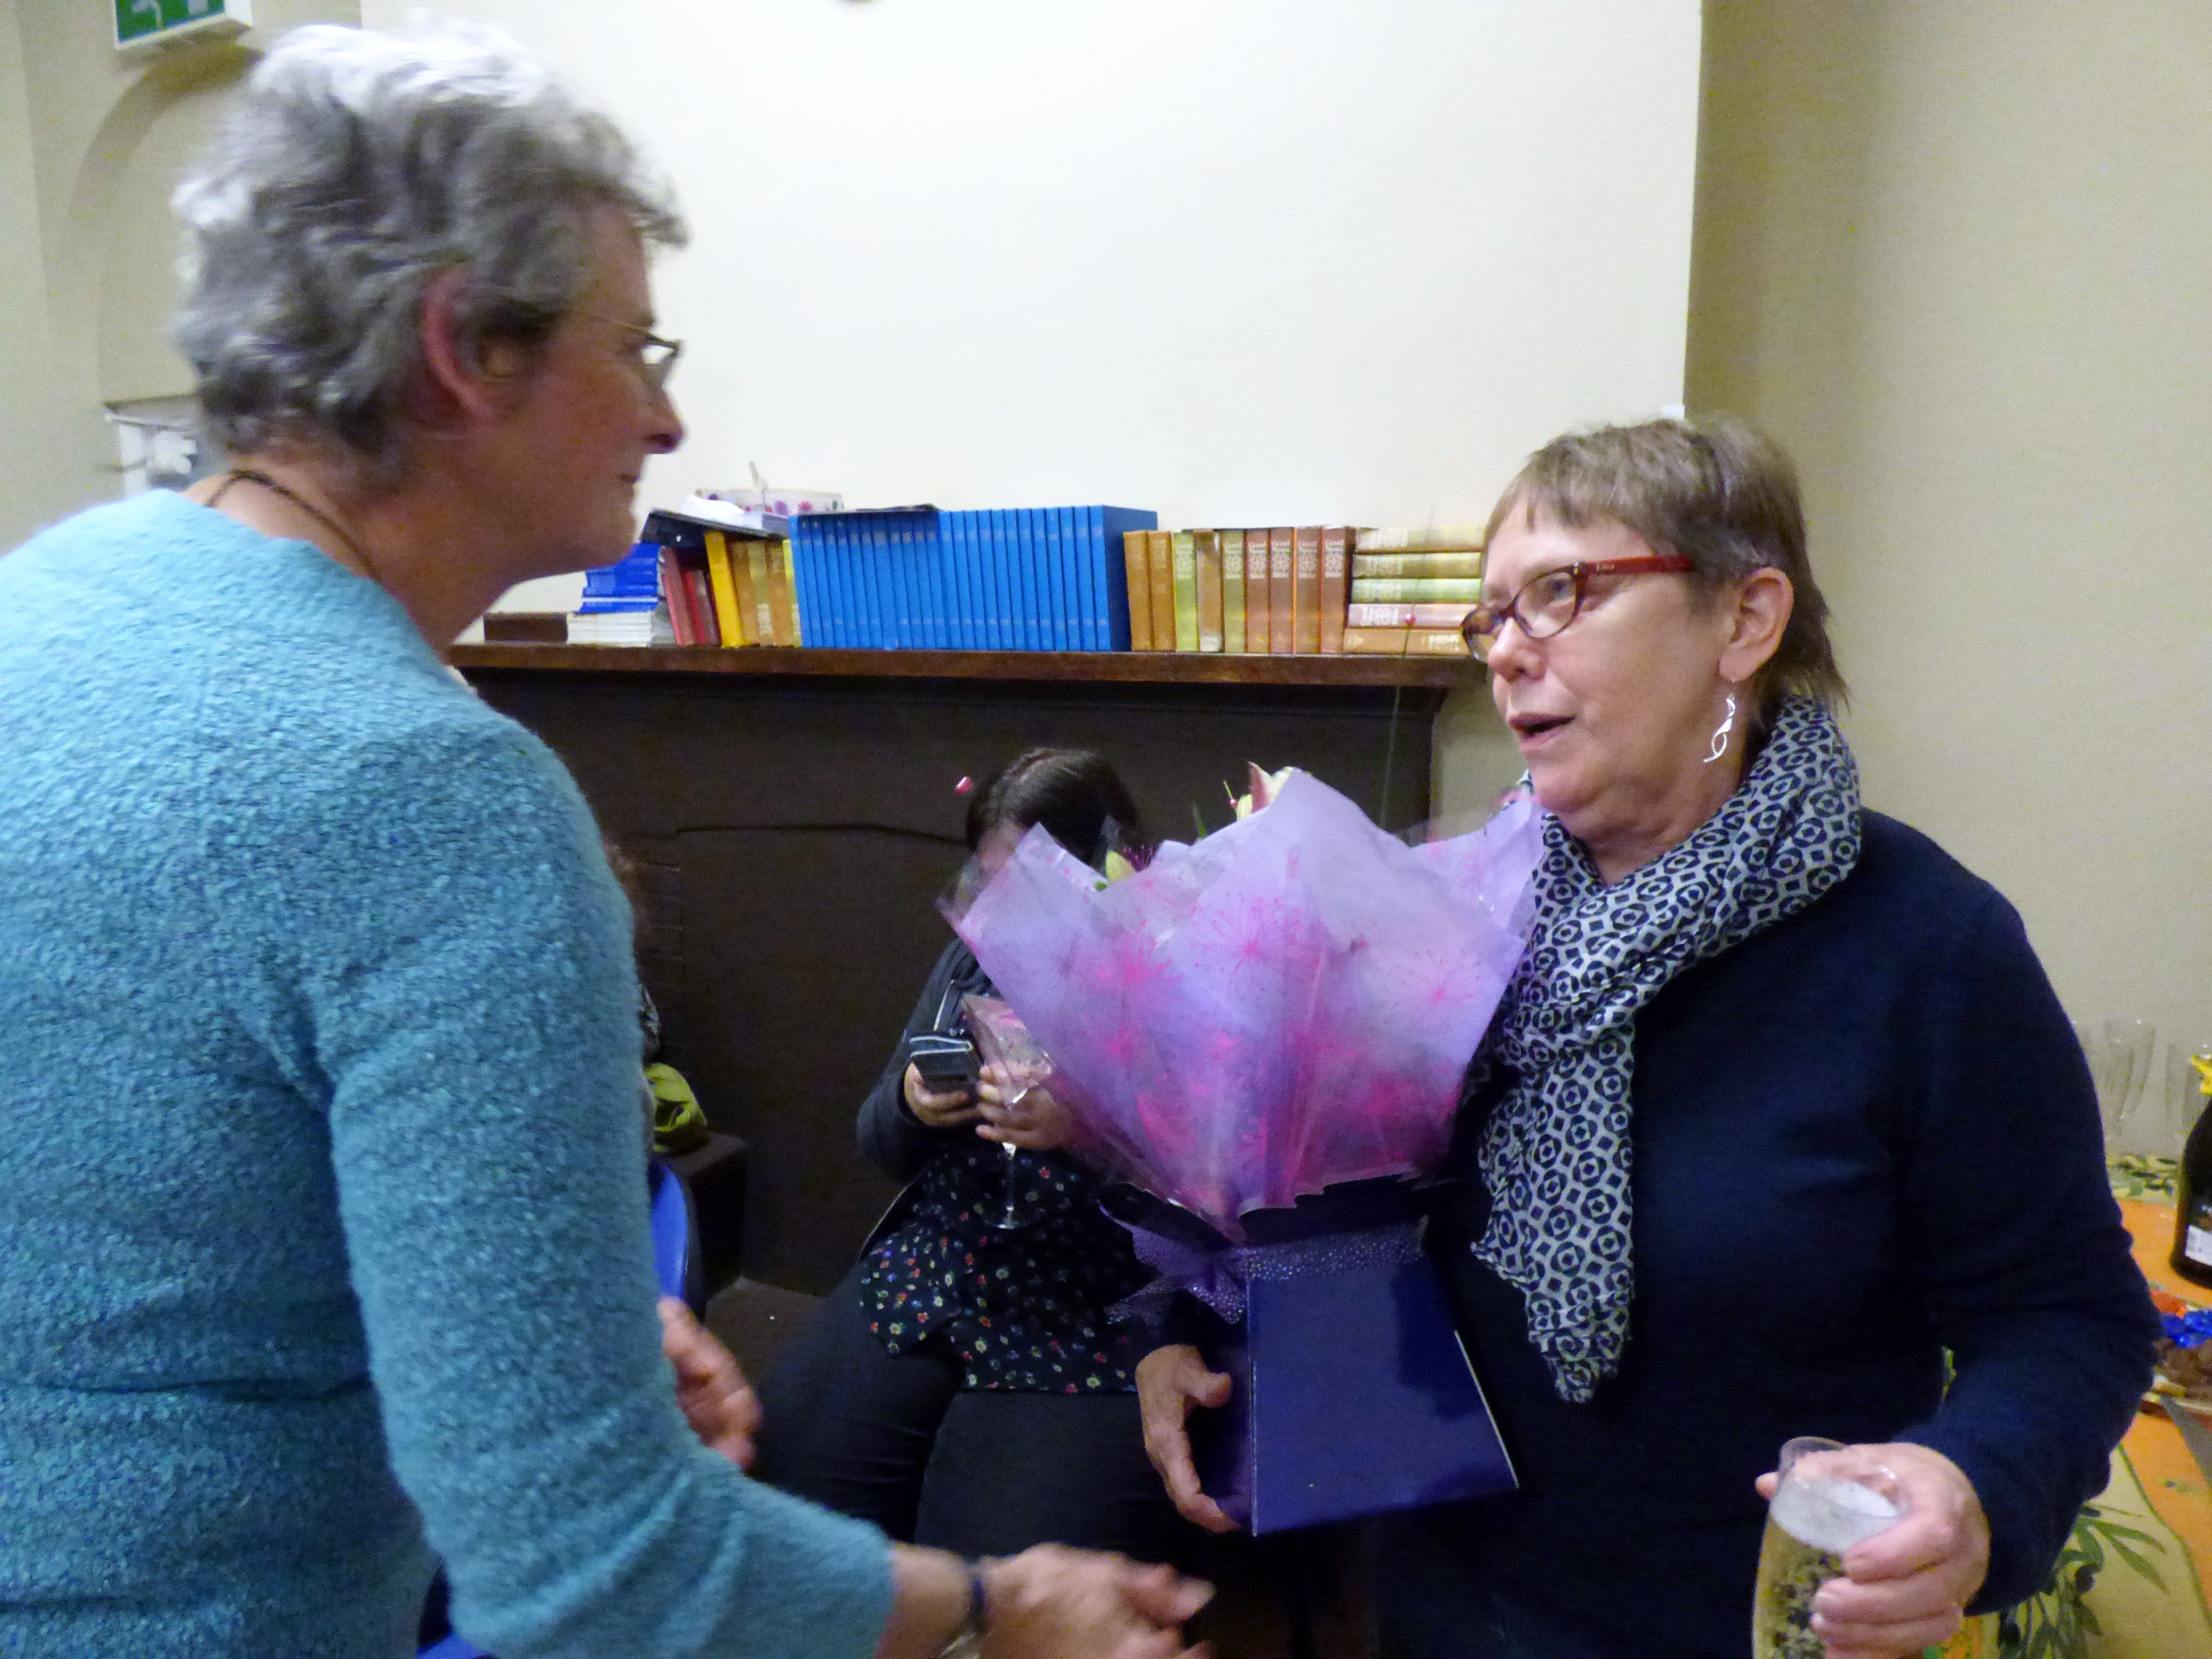 Marie Stacey is retiring as Programme Secretary after a very strenuous year. She is presented with a bouquet by our Chair, Kim Parkman at beautiful result at the end of the design workshop- Kaffe Fassett workshop, All Hallows, Dec 2016